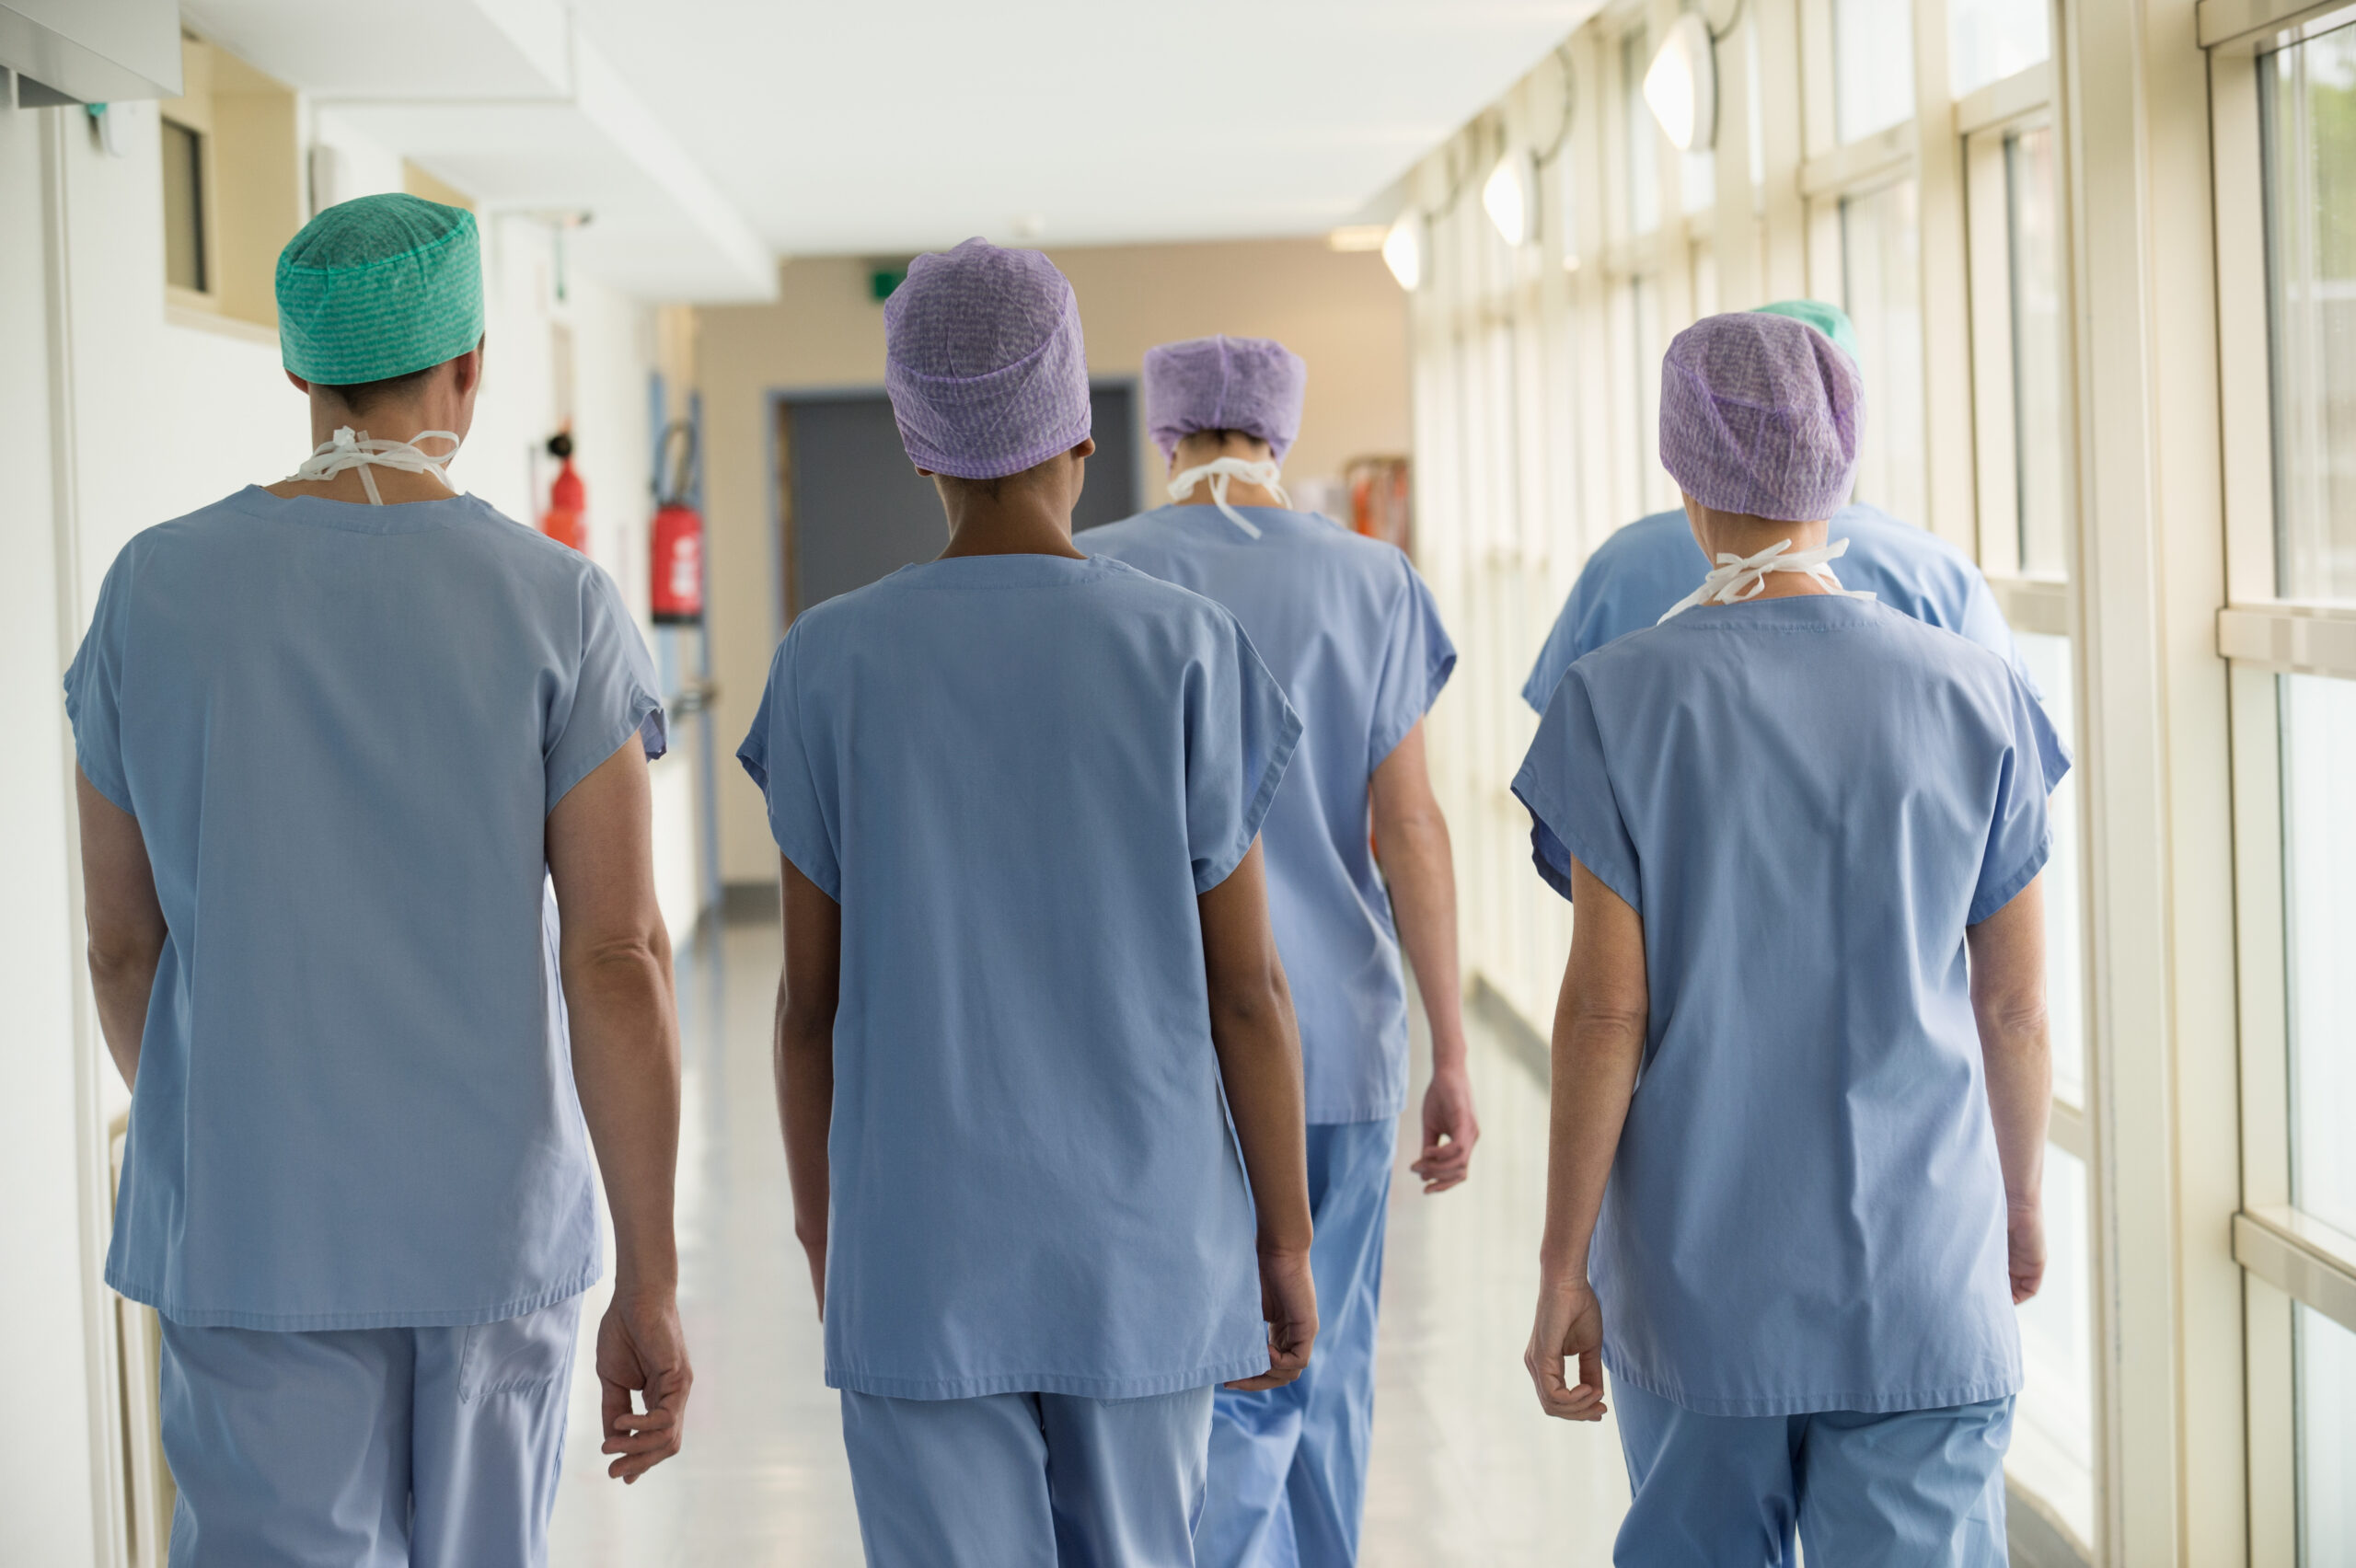 Rear view of a medical team walking in the corridor of a hospital